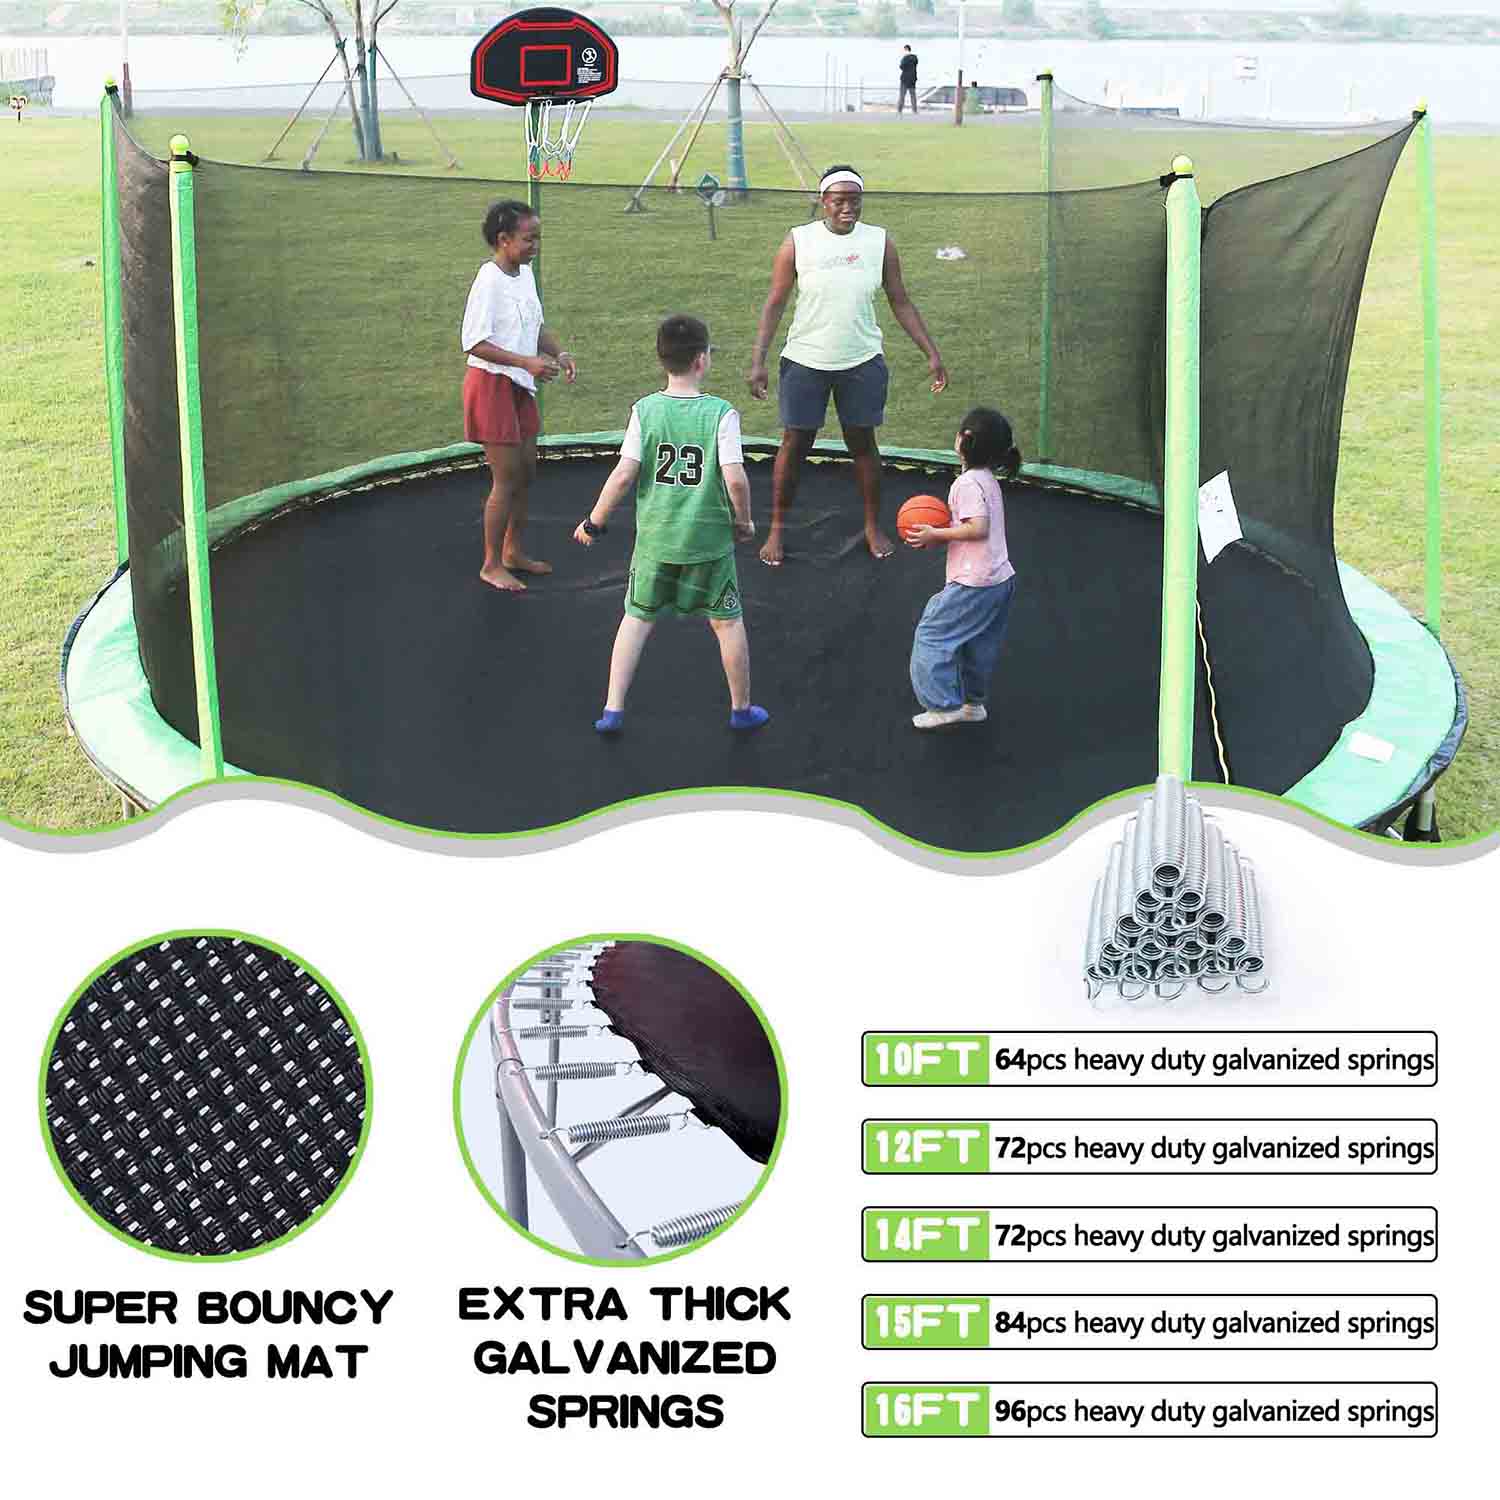 4 people playing basketball on a 10ft green trampoline and underneath it says_super bounce mat and Extra thick galvanized spring